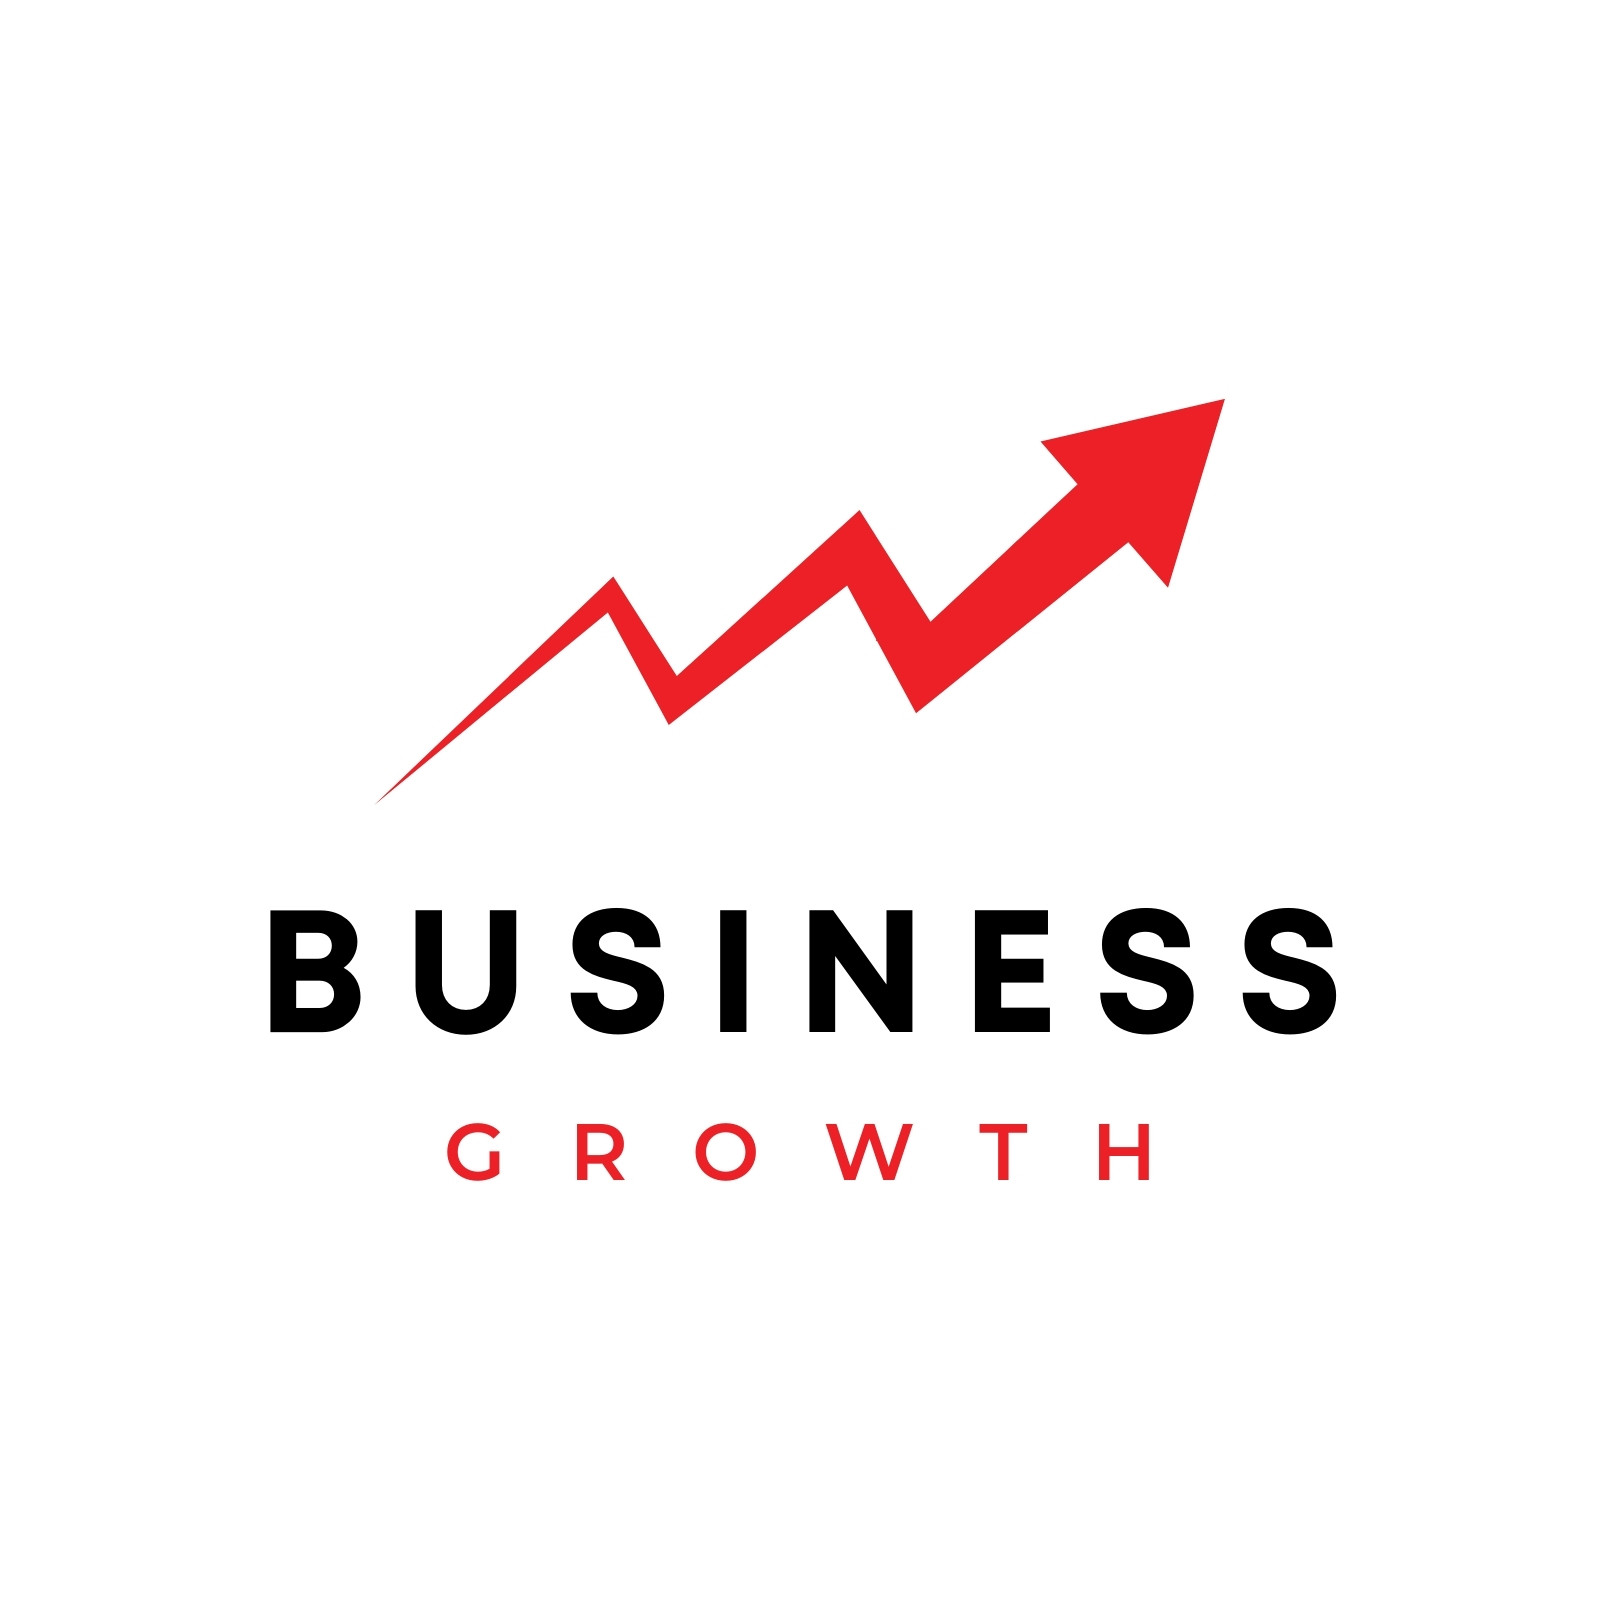 business growth logo Template | PosterMyWall